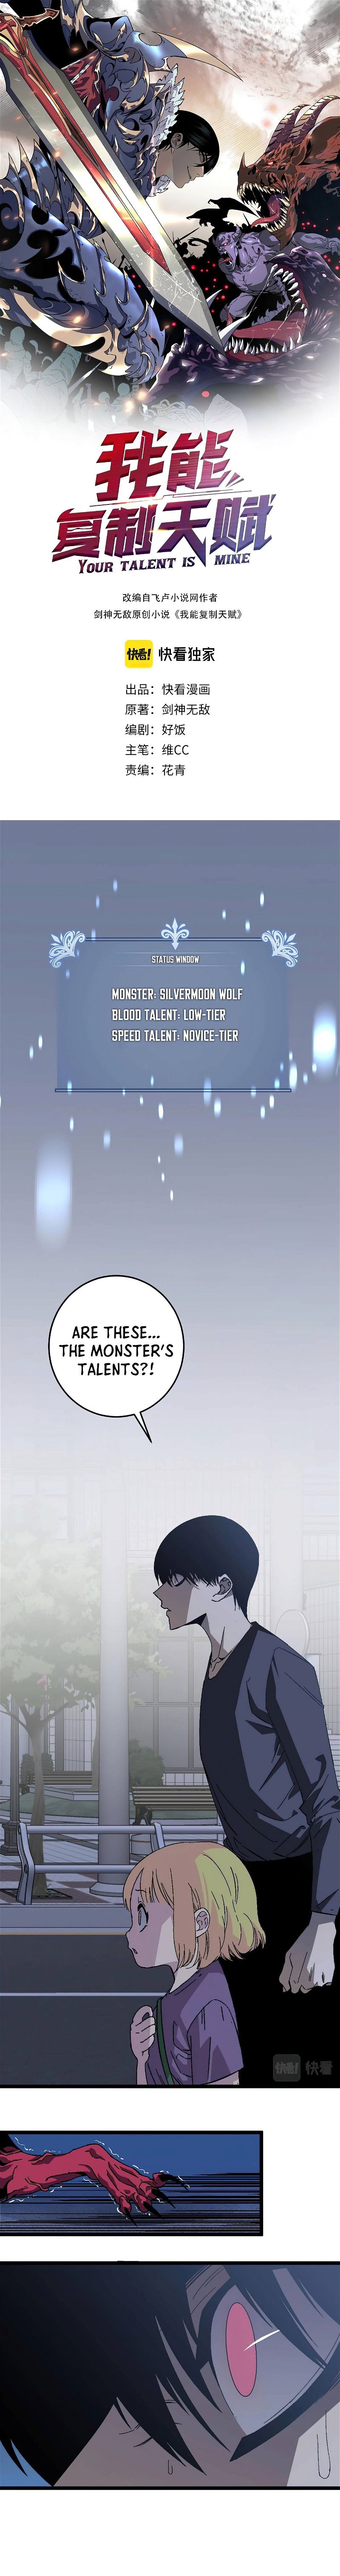 Your Talent is Mine Chapter 4 page 2